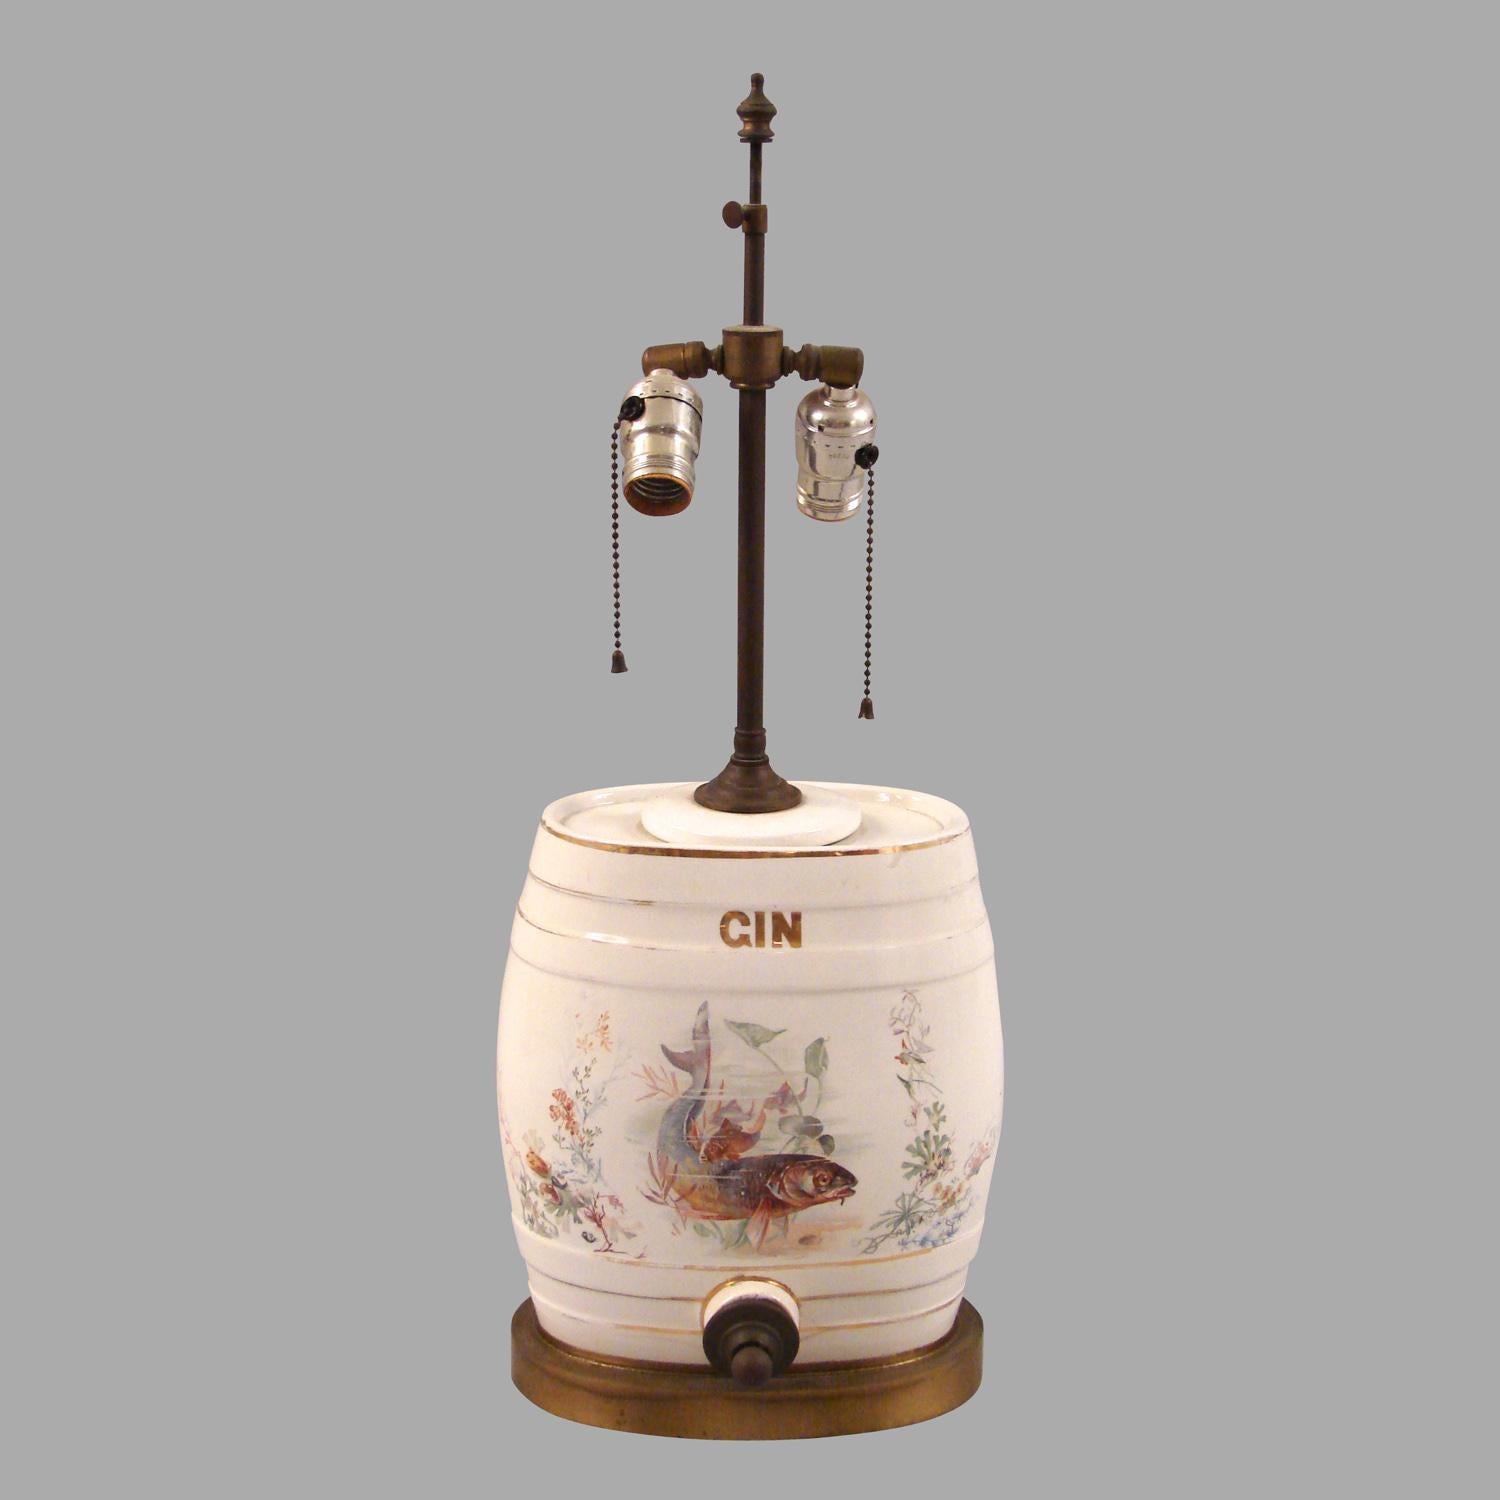 19th Century English Victorian Porcelain Gin Dispenser with Trout Decoration